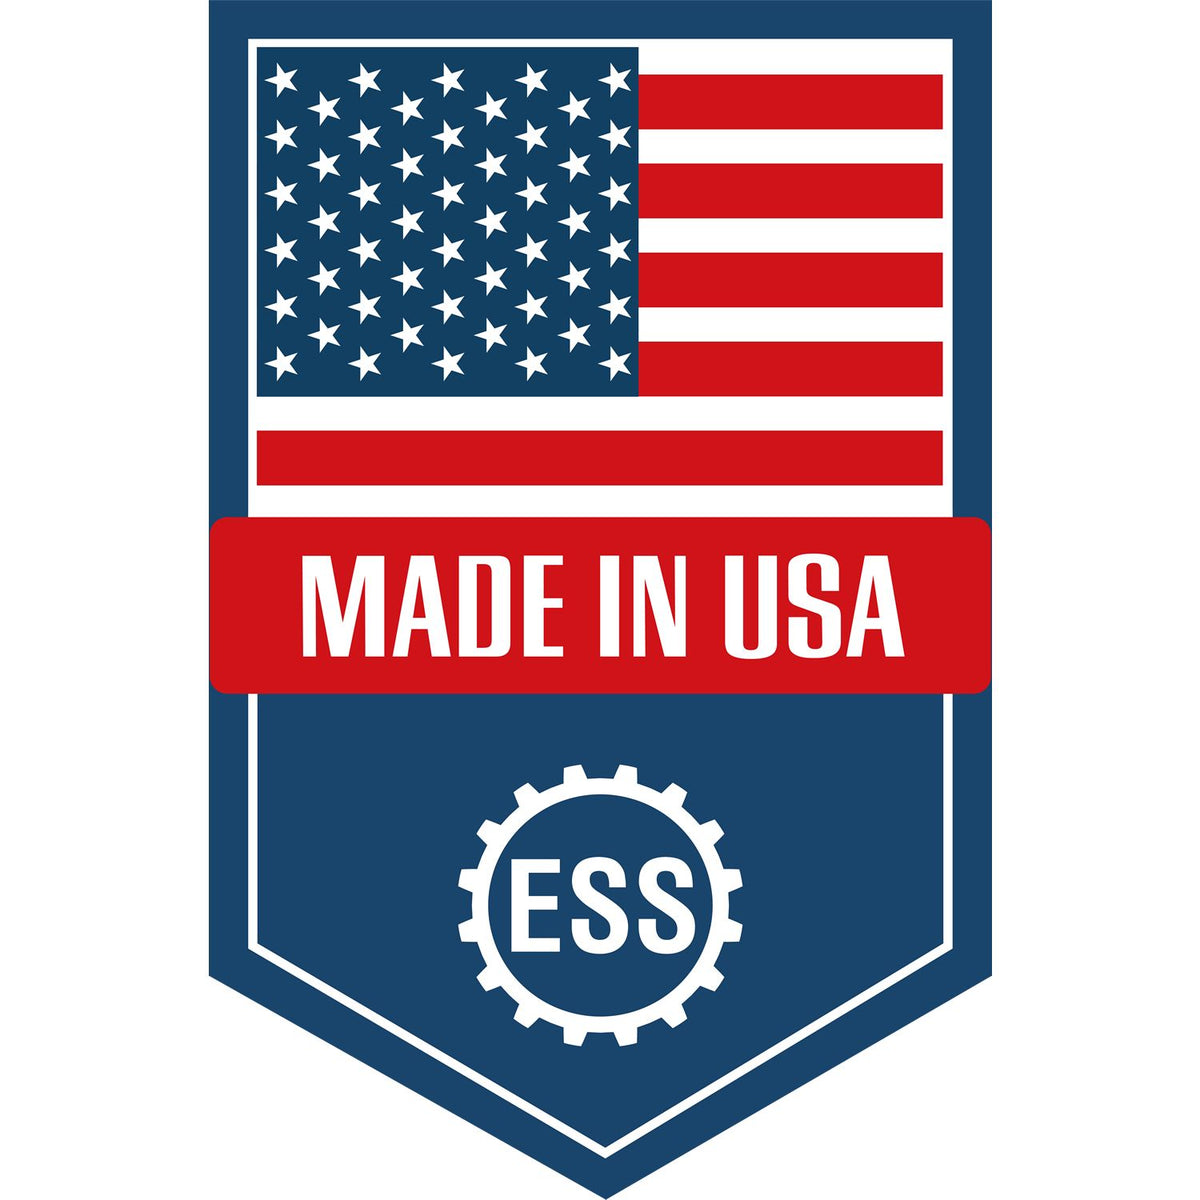 An icon or graphic with an american flag and text reading Made in USA for the Slim Pre-Inked Washington Professional Engineer Seal Stamp